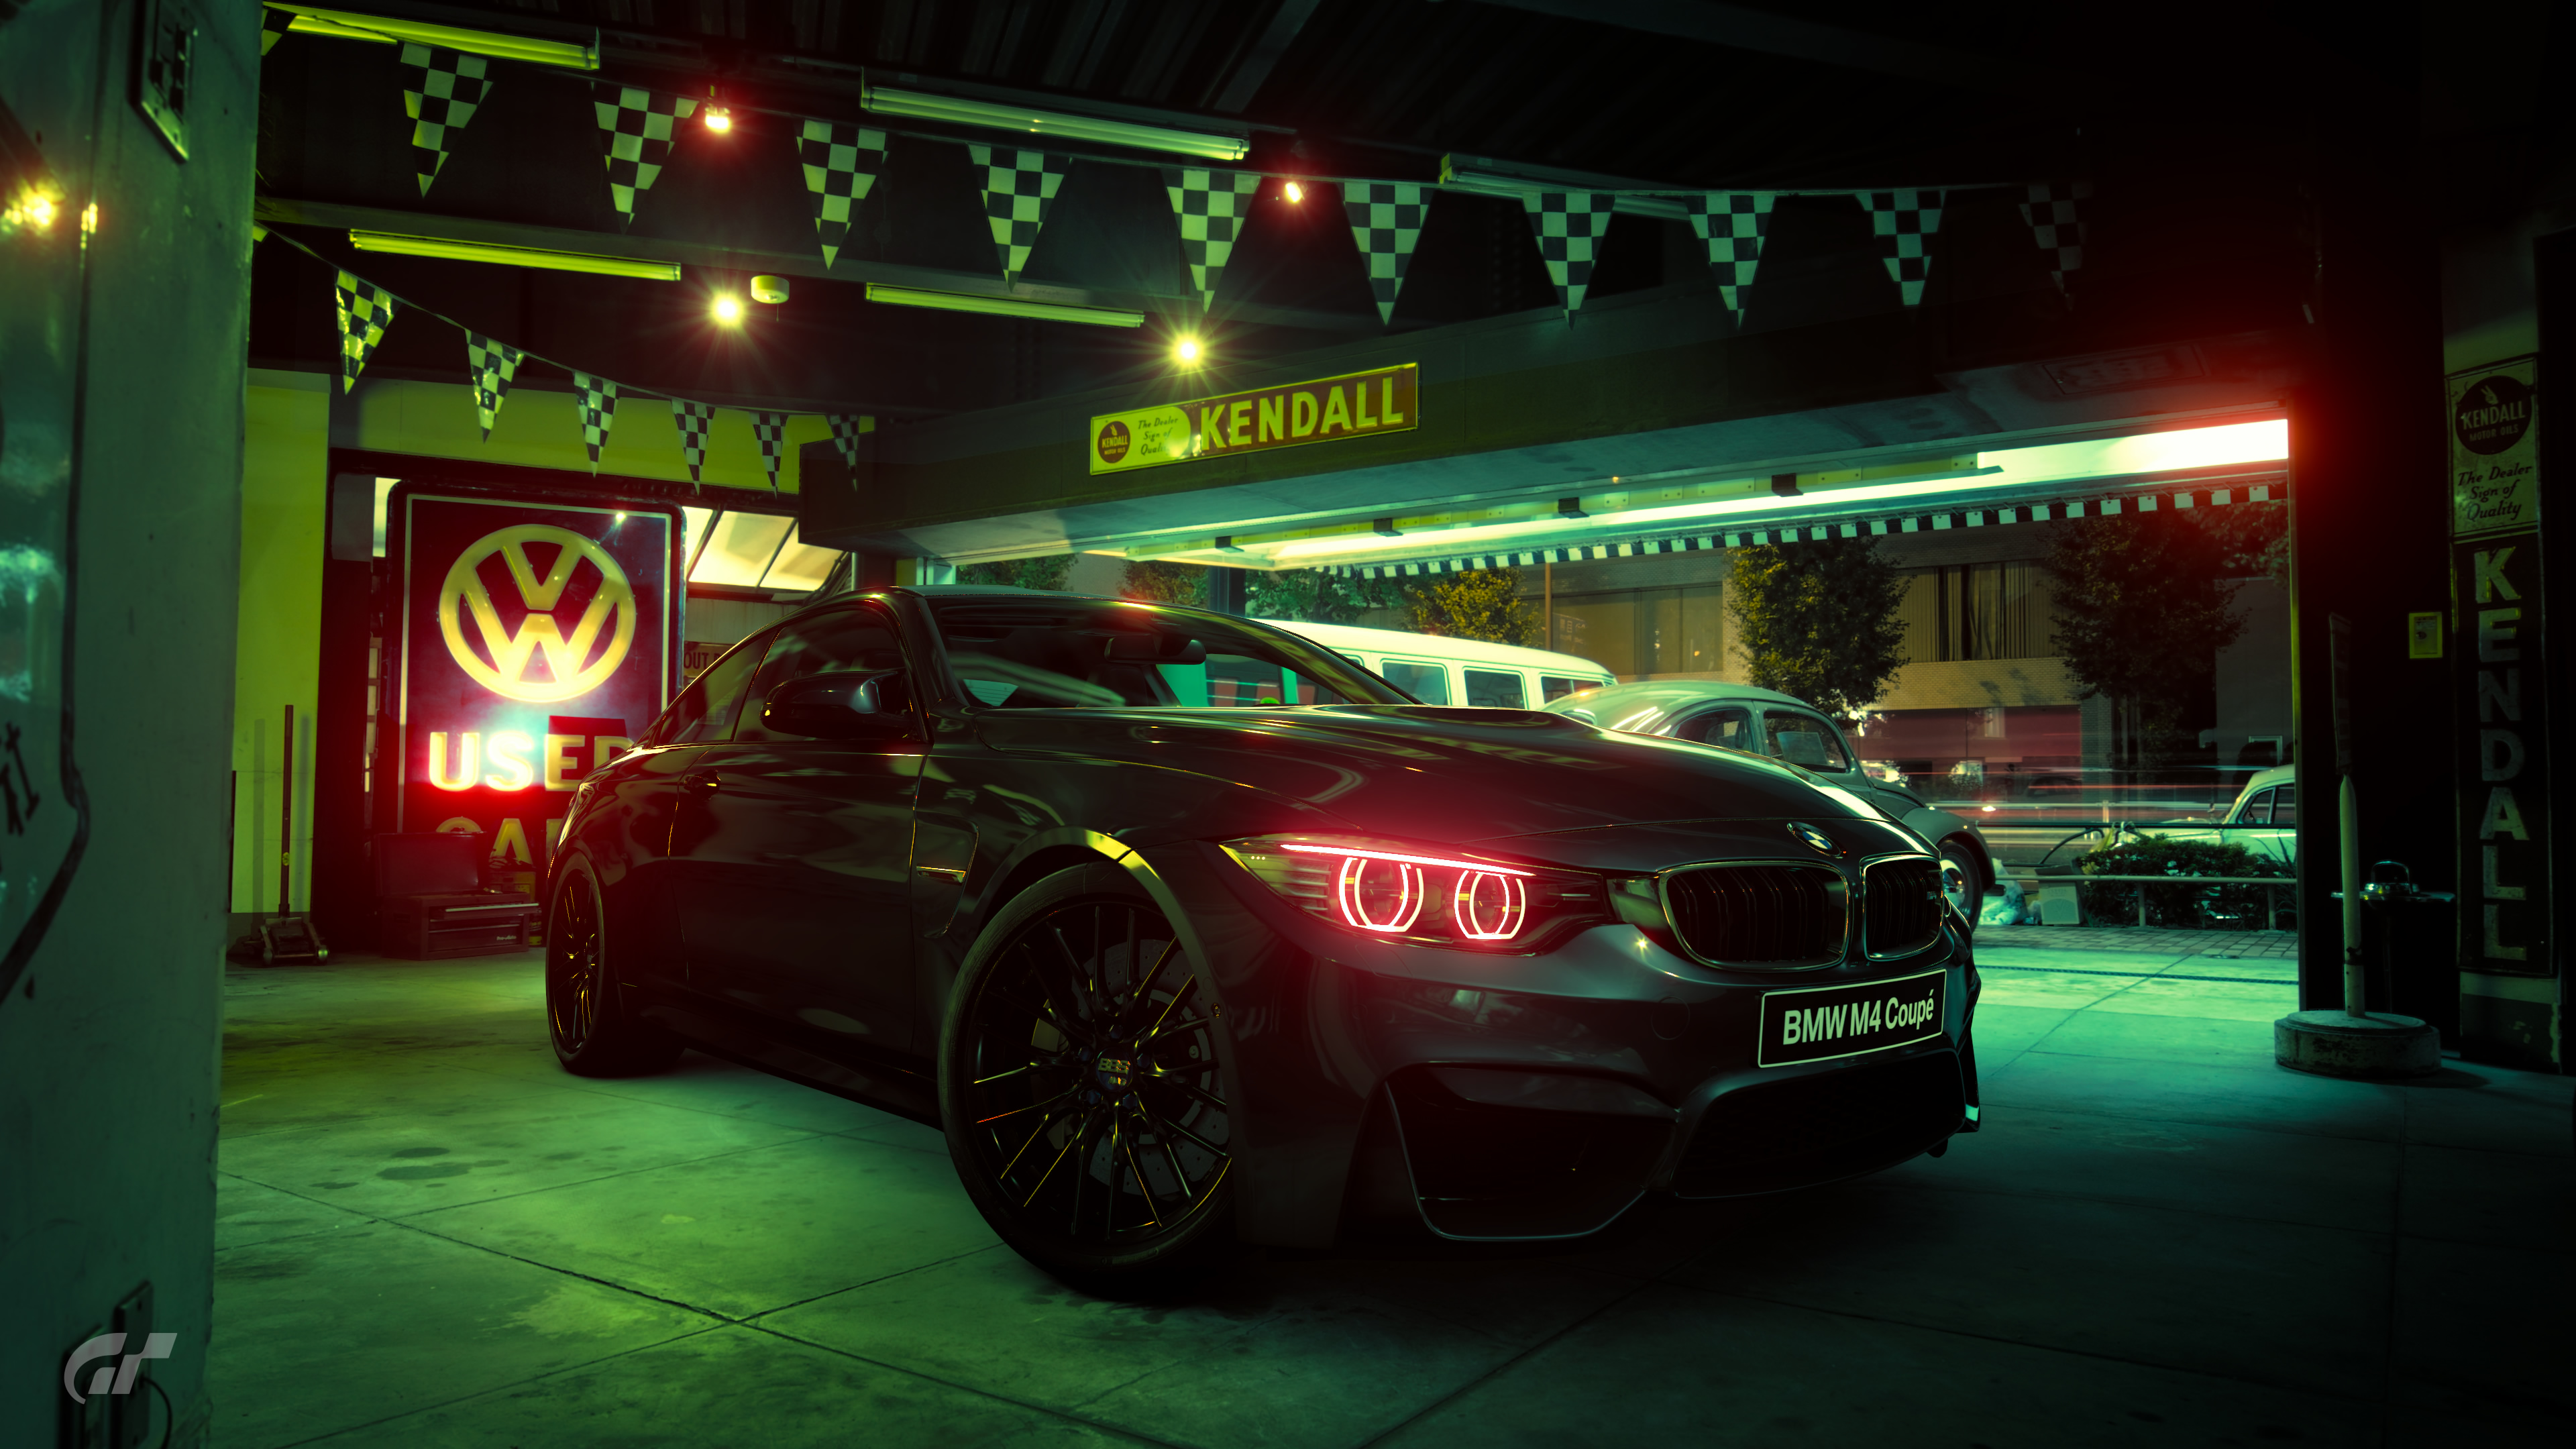 Wallpapers 4k Gran Turismo Bmw M4 Coupe 4k Wallpapers.